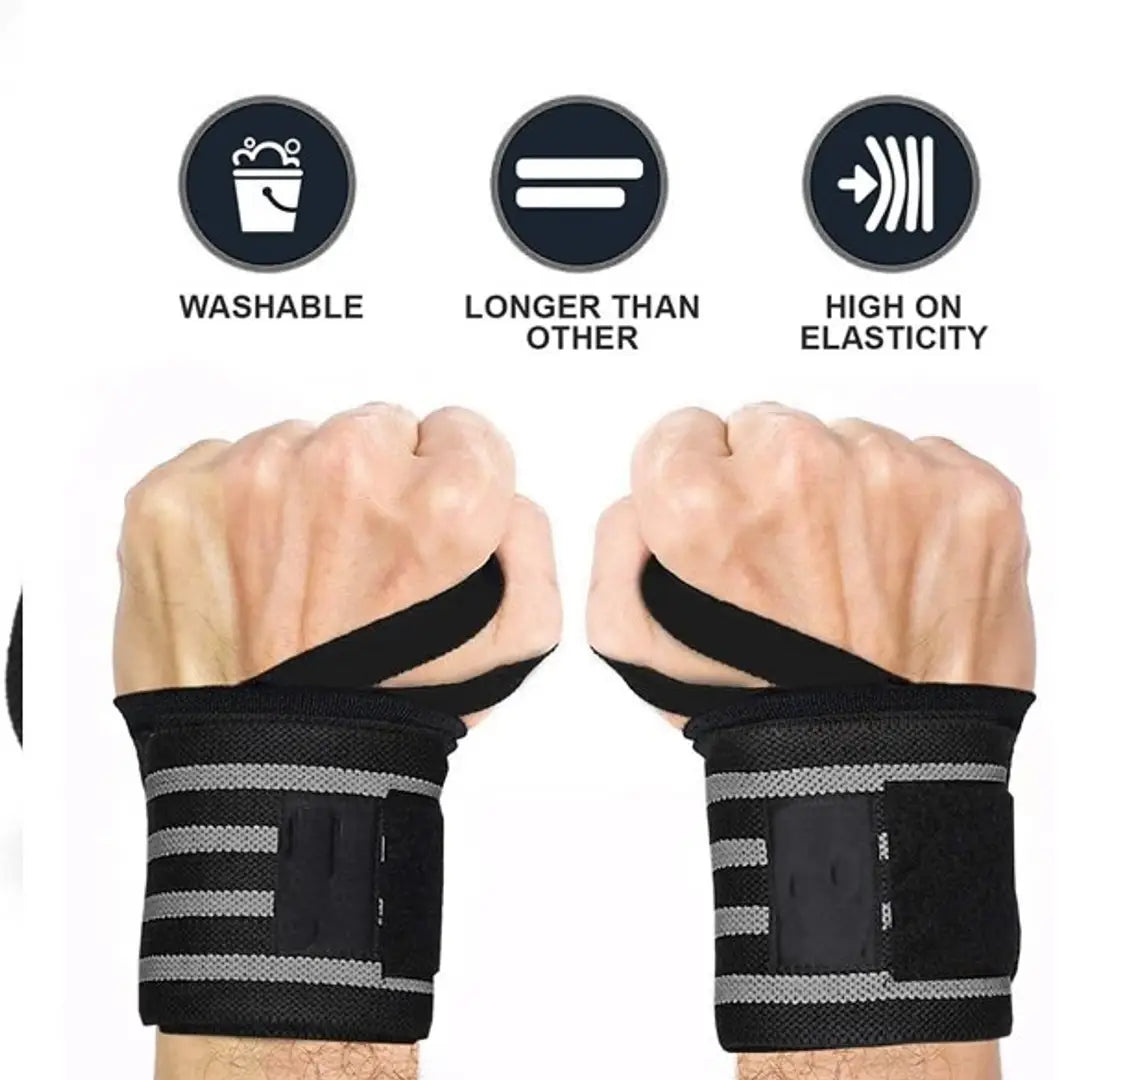 Mens Elasticized-Fabric Professional Thumb Loop, Stretchable Wrist Supporter Wristband for Sports